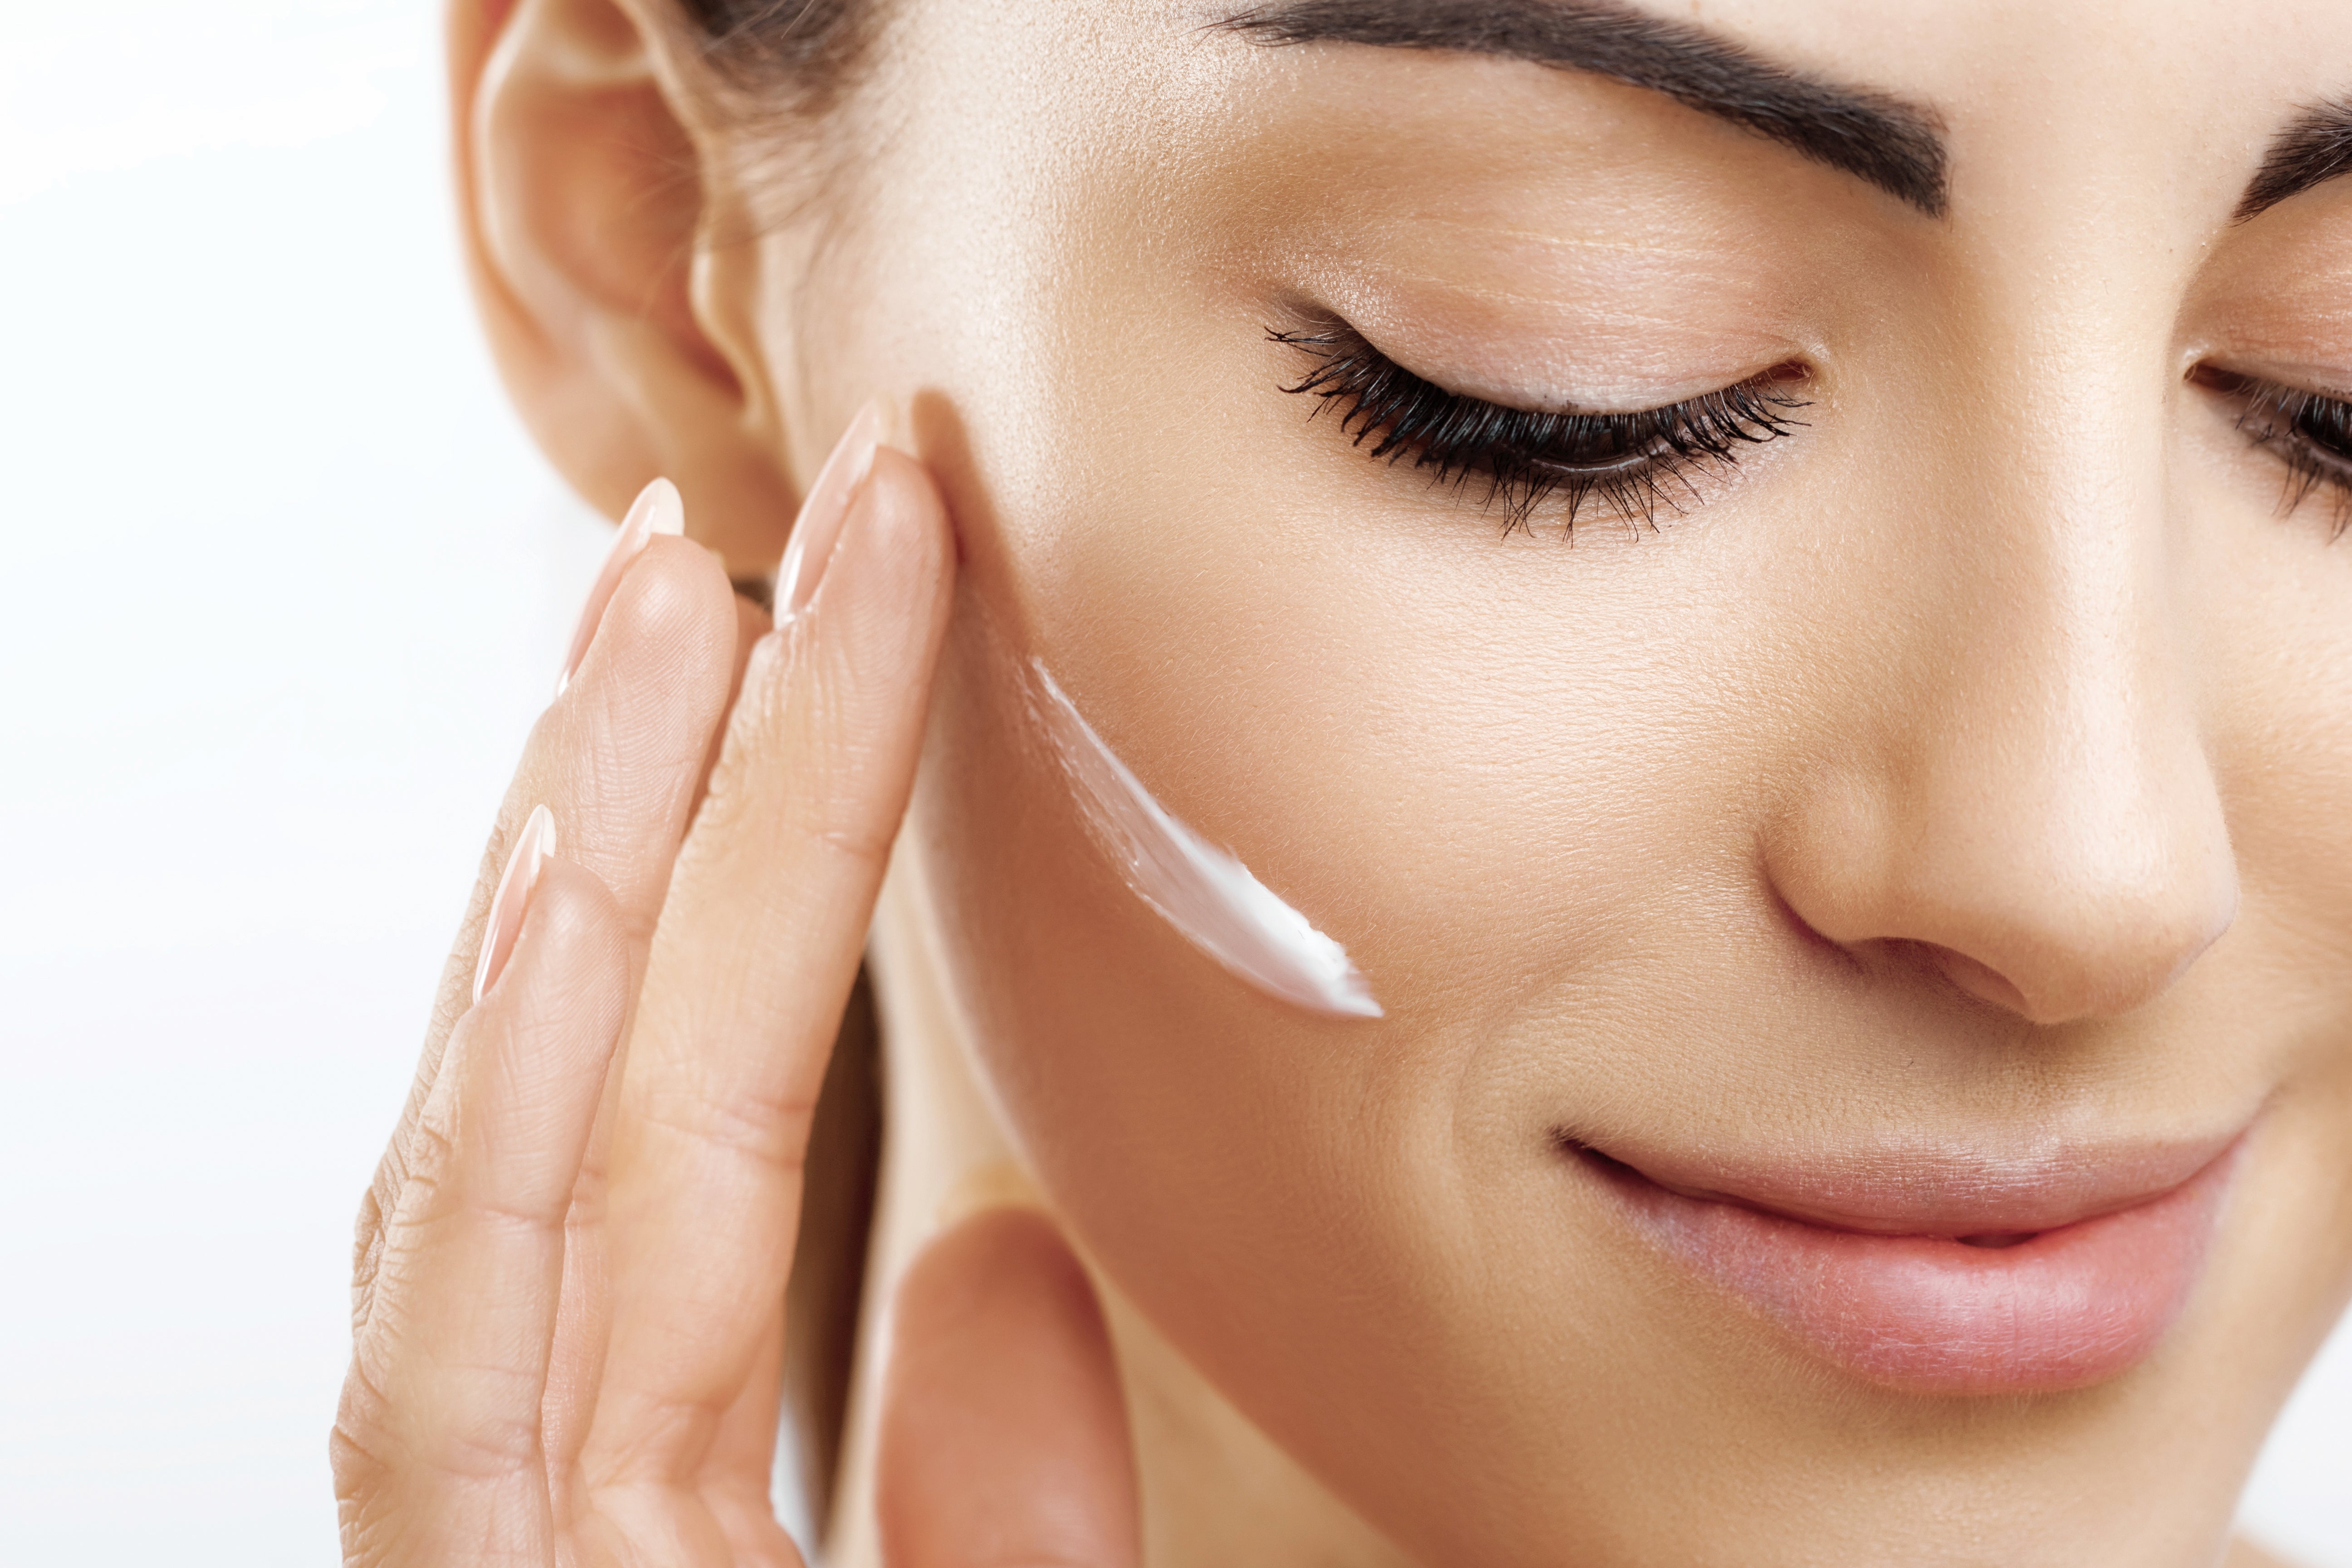 5 Tips on How to Hydrate Your Skin